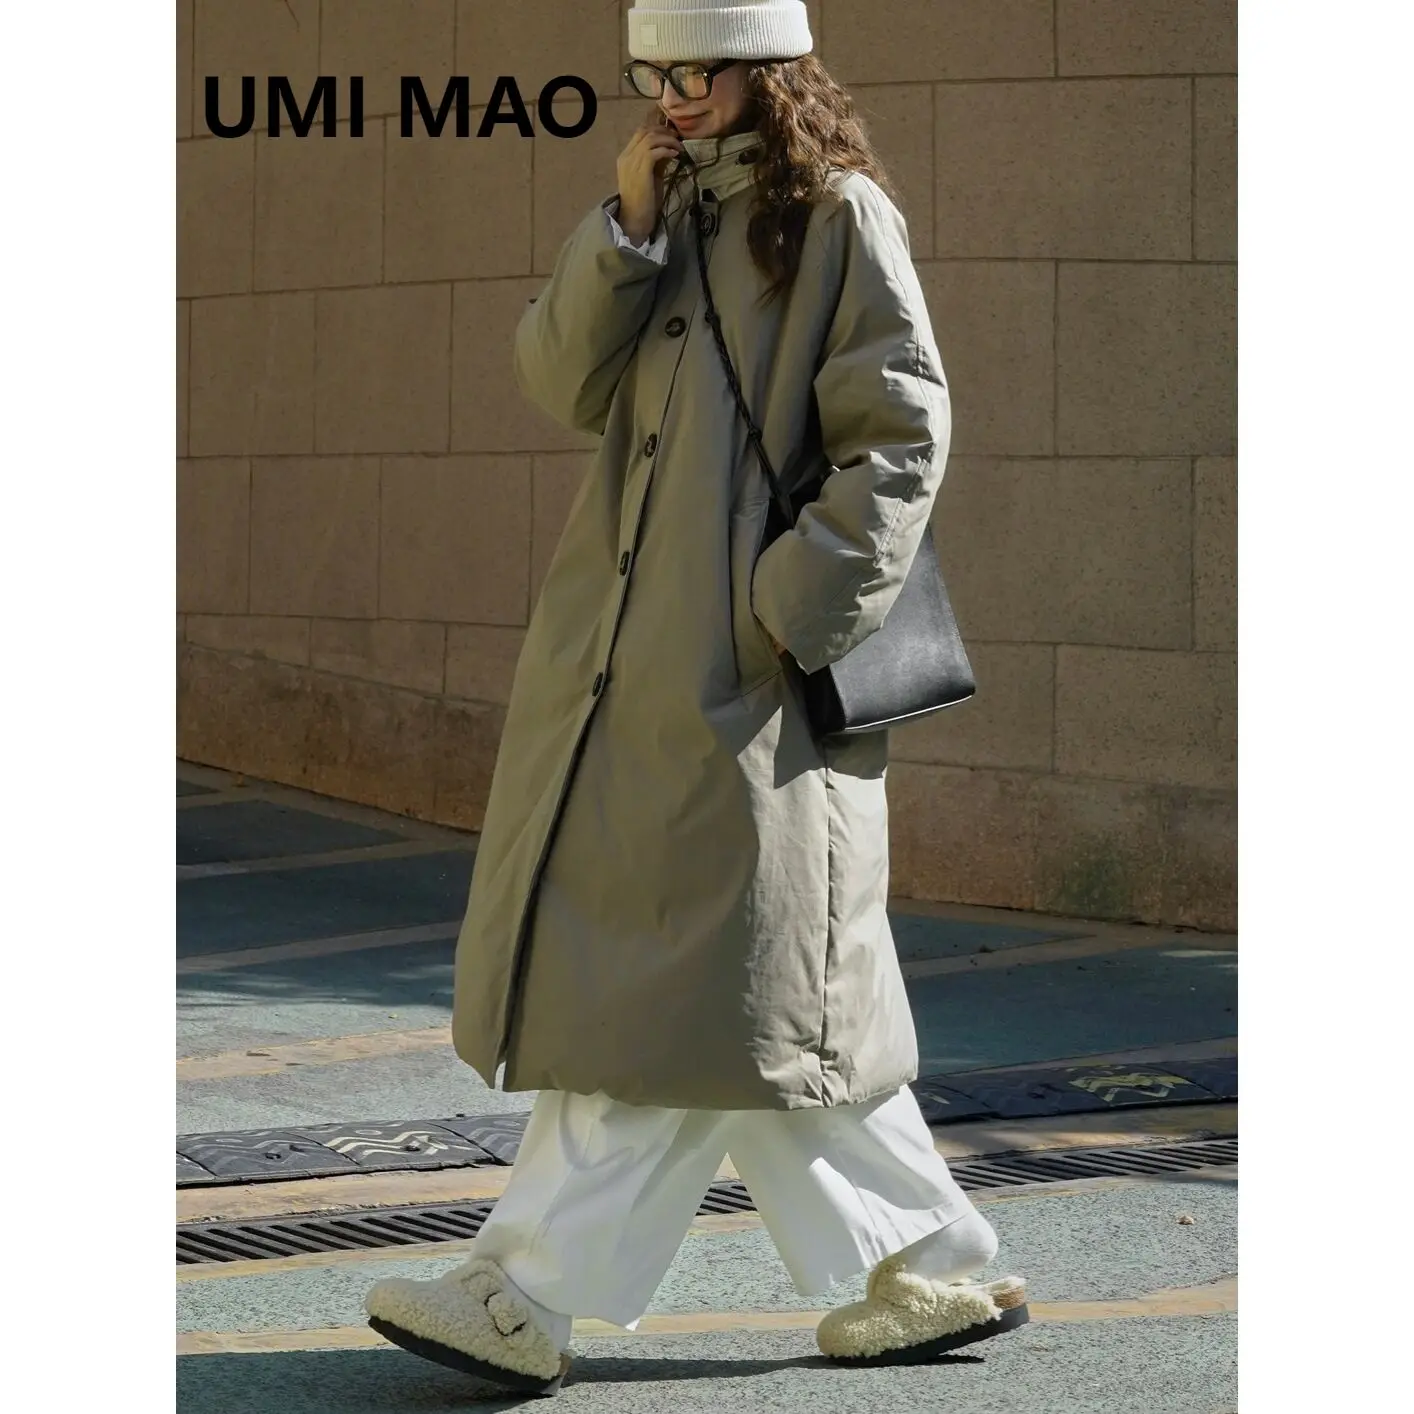 

UMI MAO Winter Jacket New Japanese Fashion Stand Neck Silhouette Long Down Coat Loose Fluffy Cold Warm Coat For Women